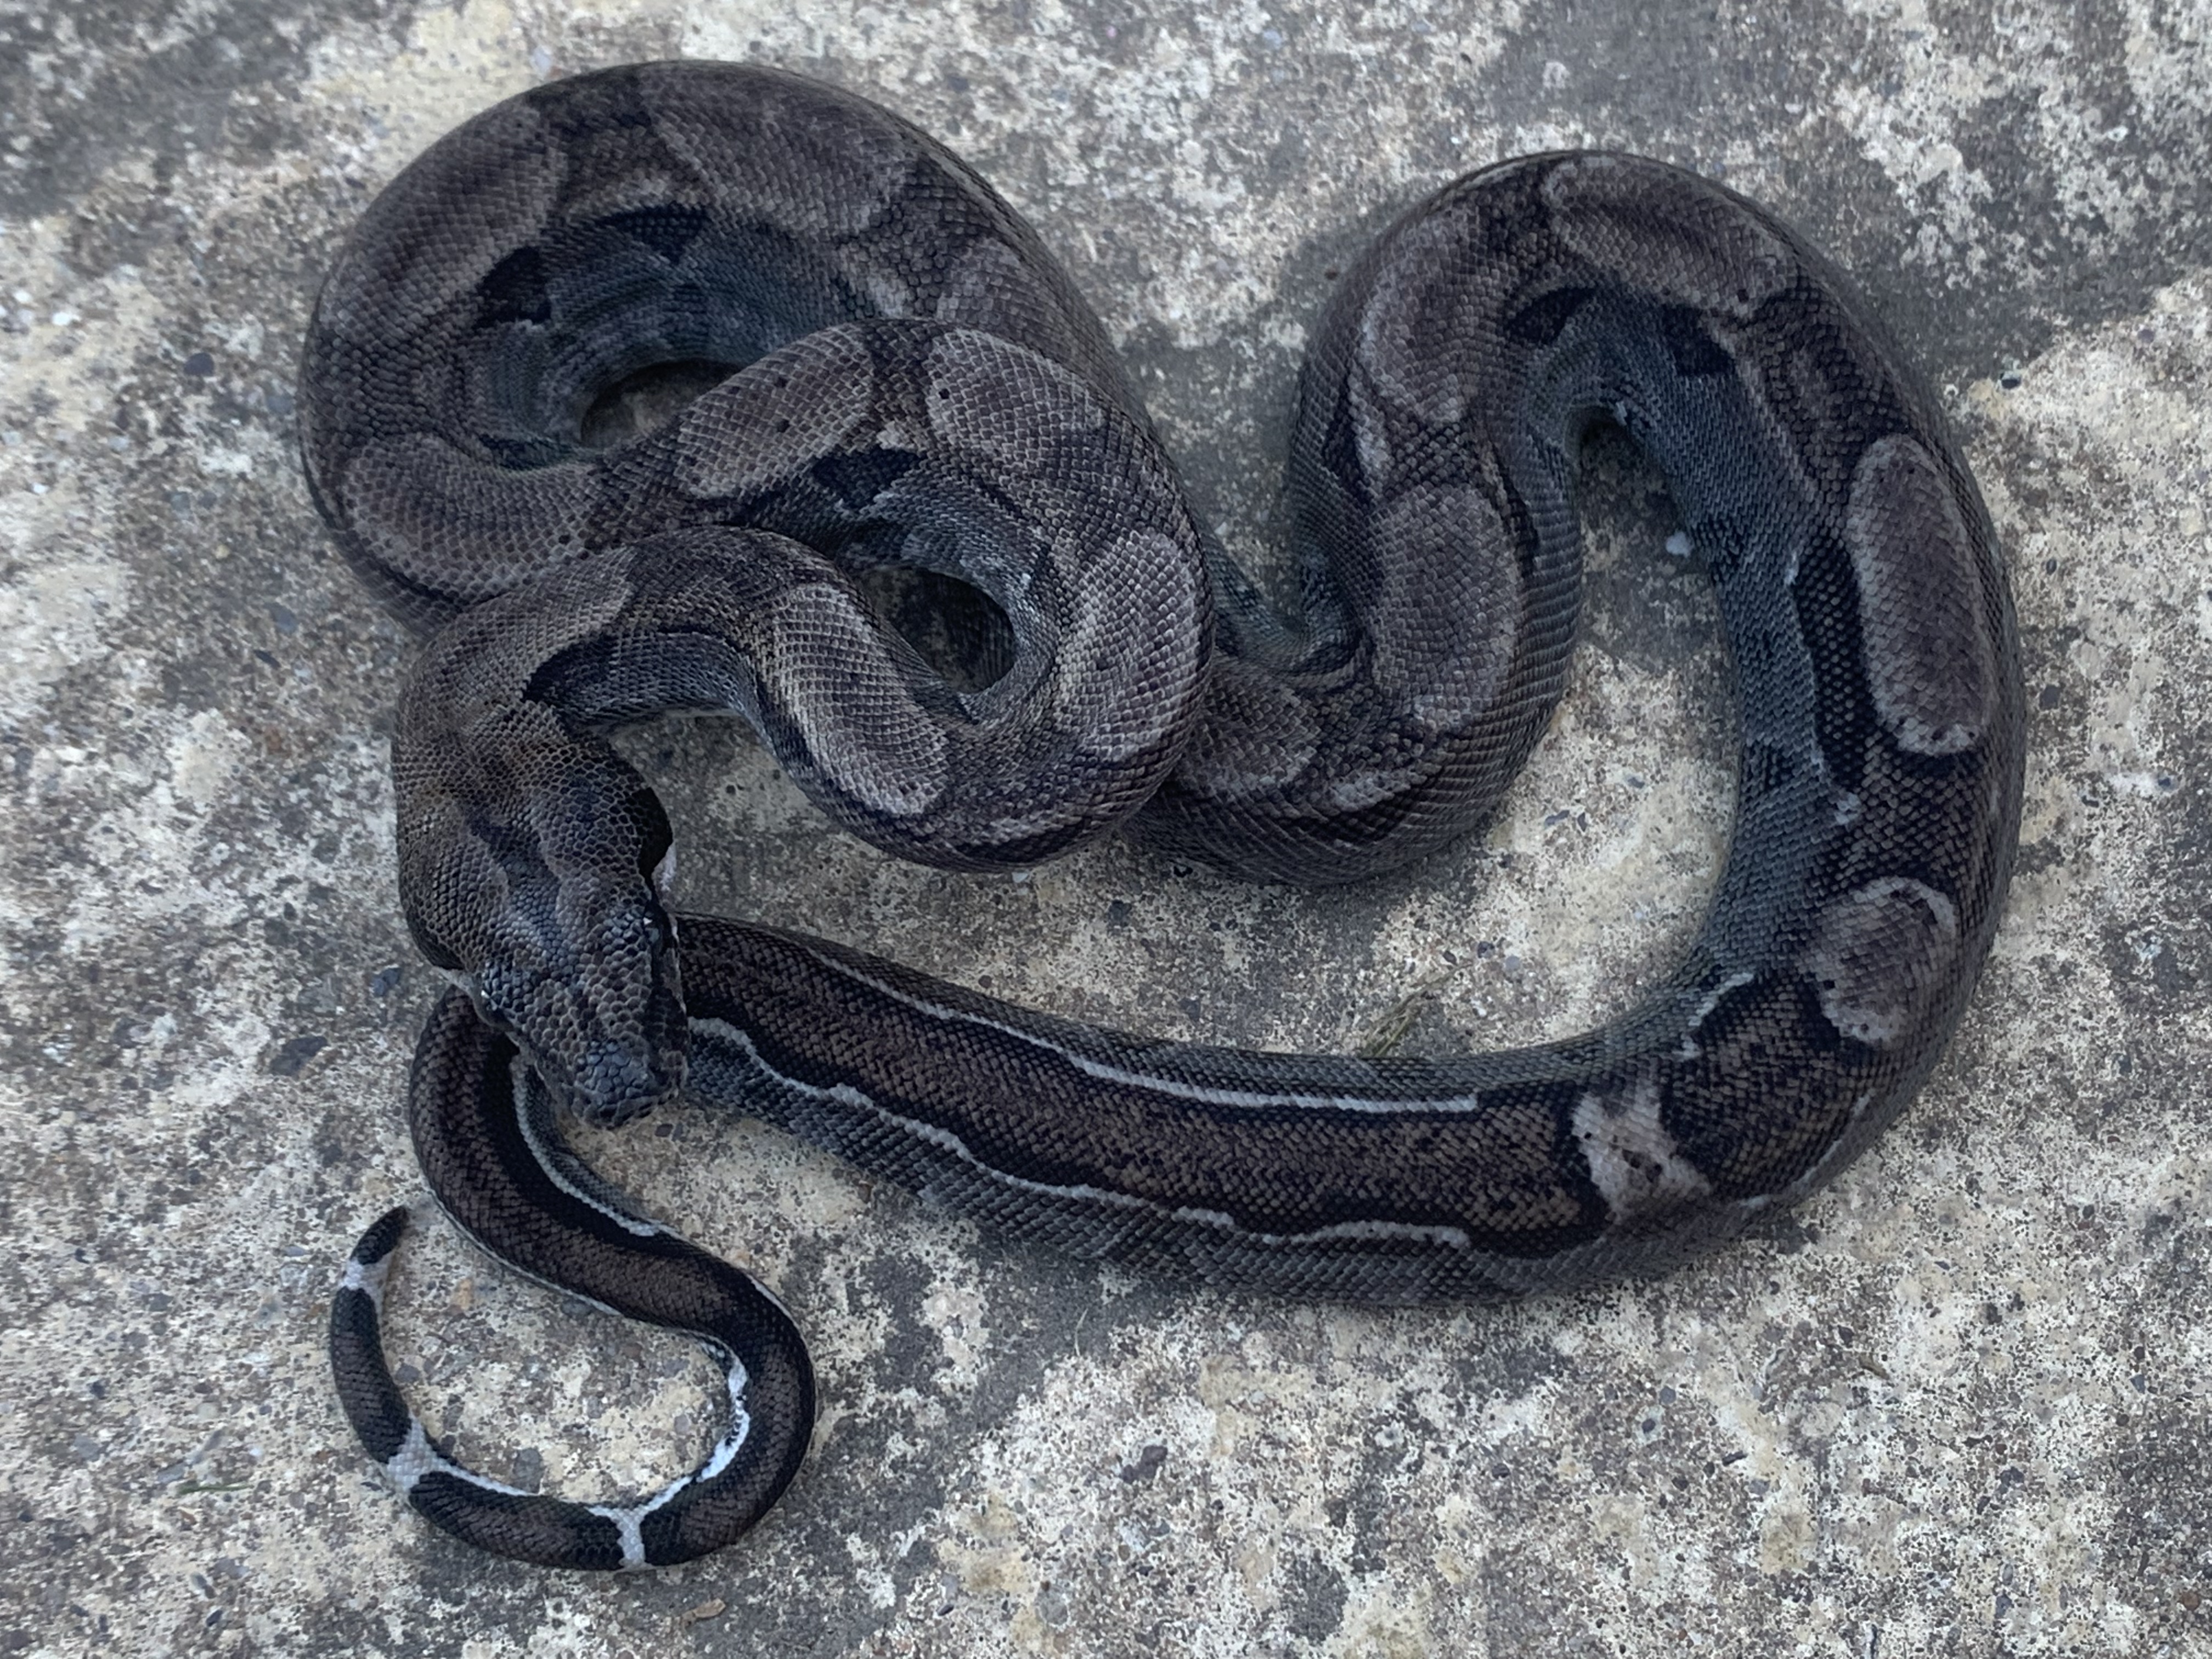 Male RDR Black Eyed Anery Boa Constrictor by Kevin Hasley